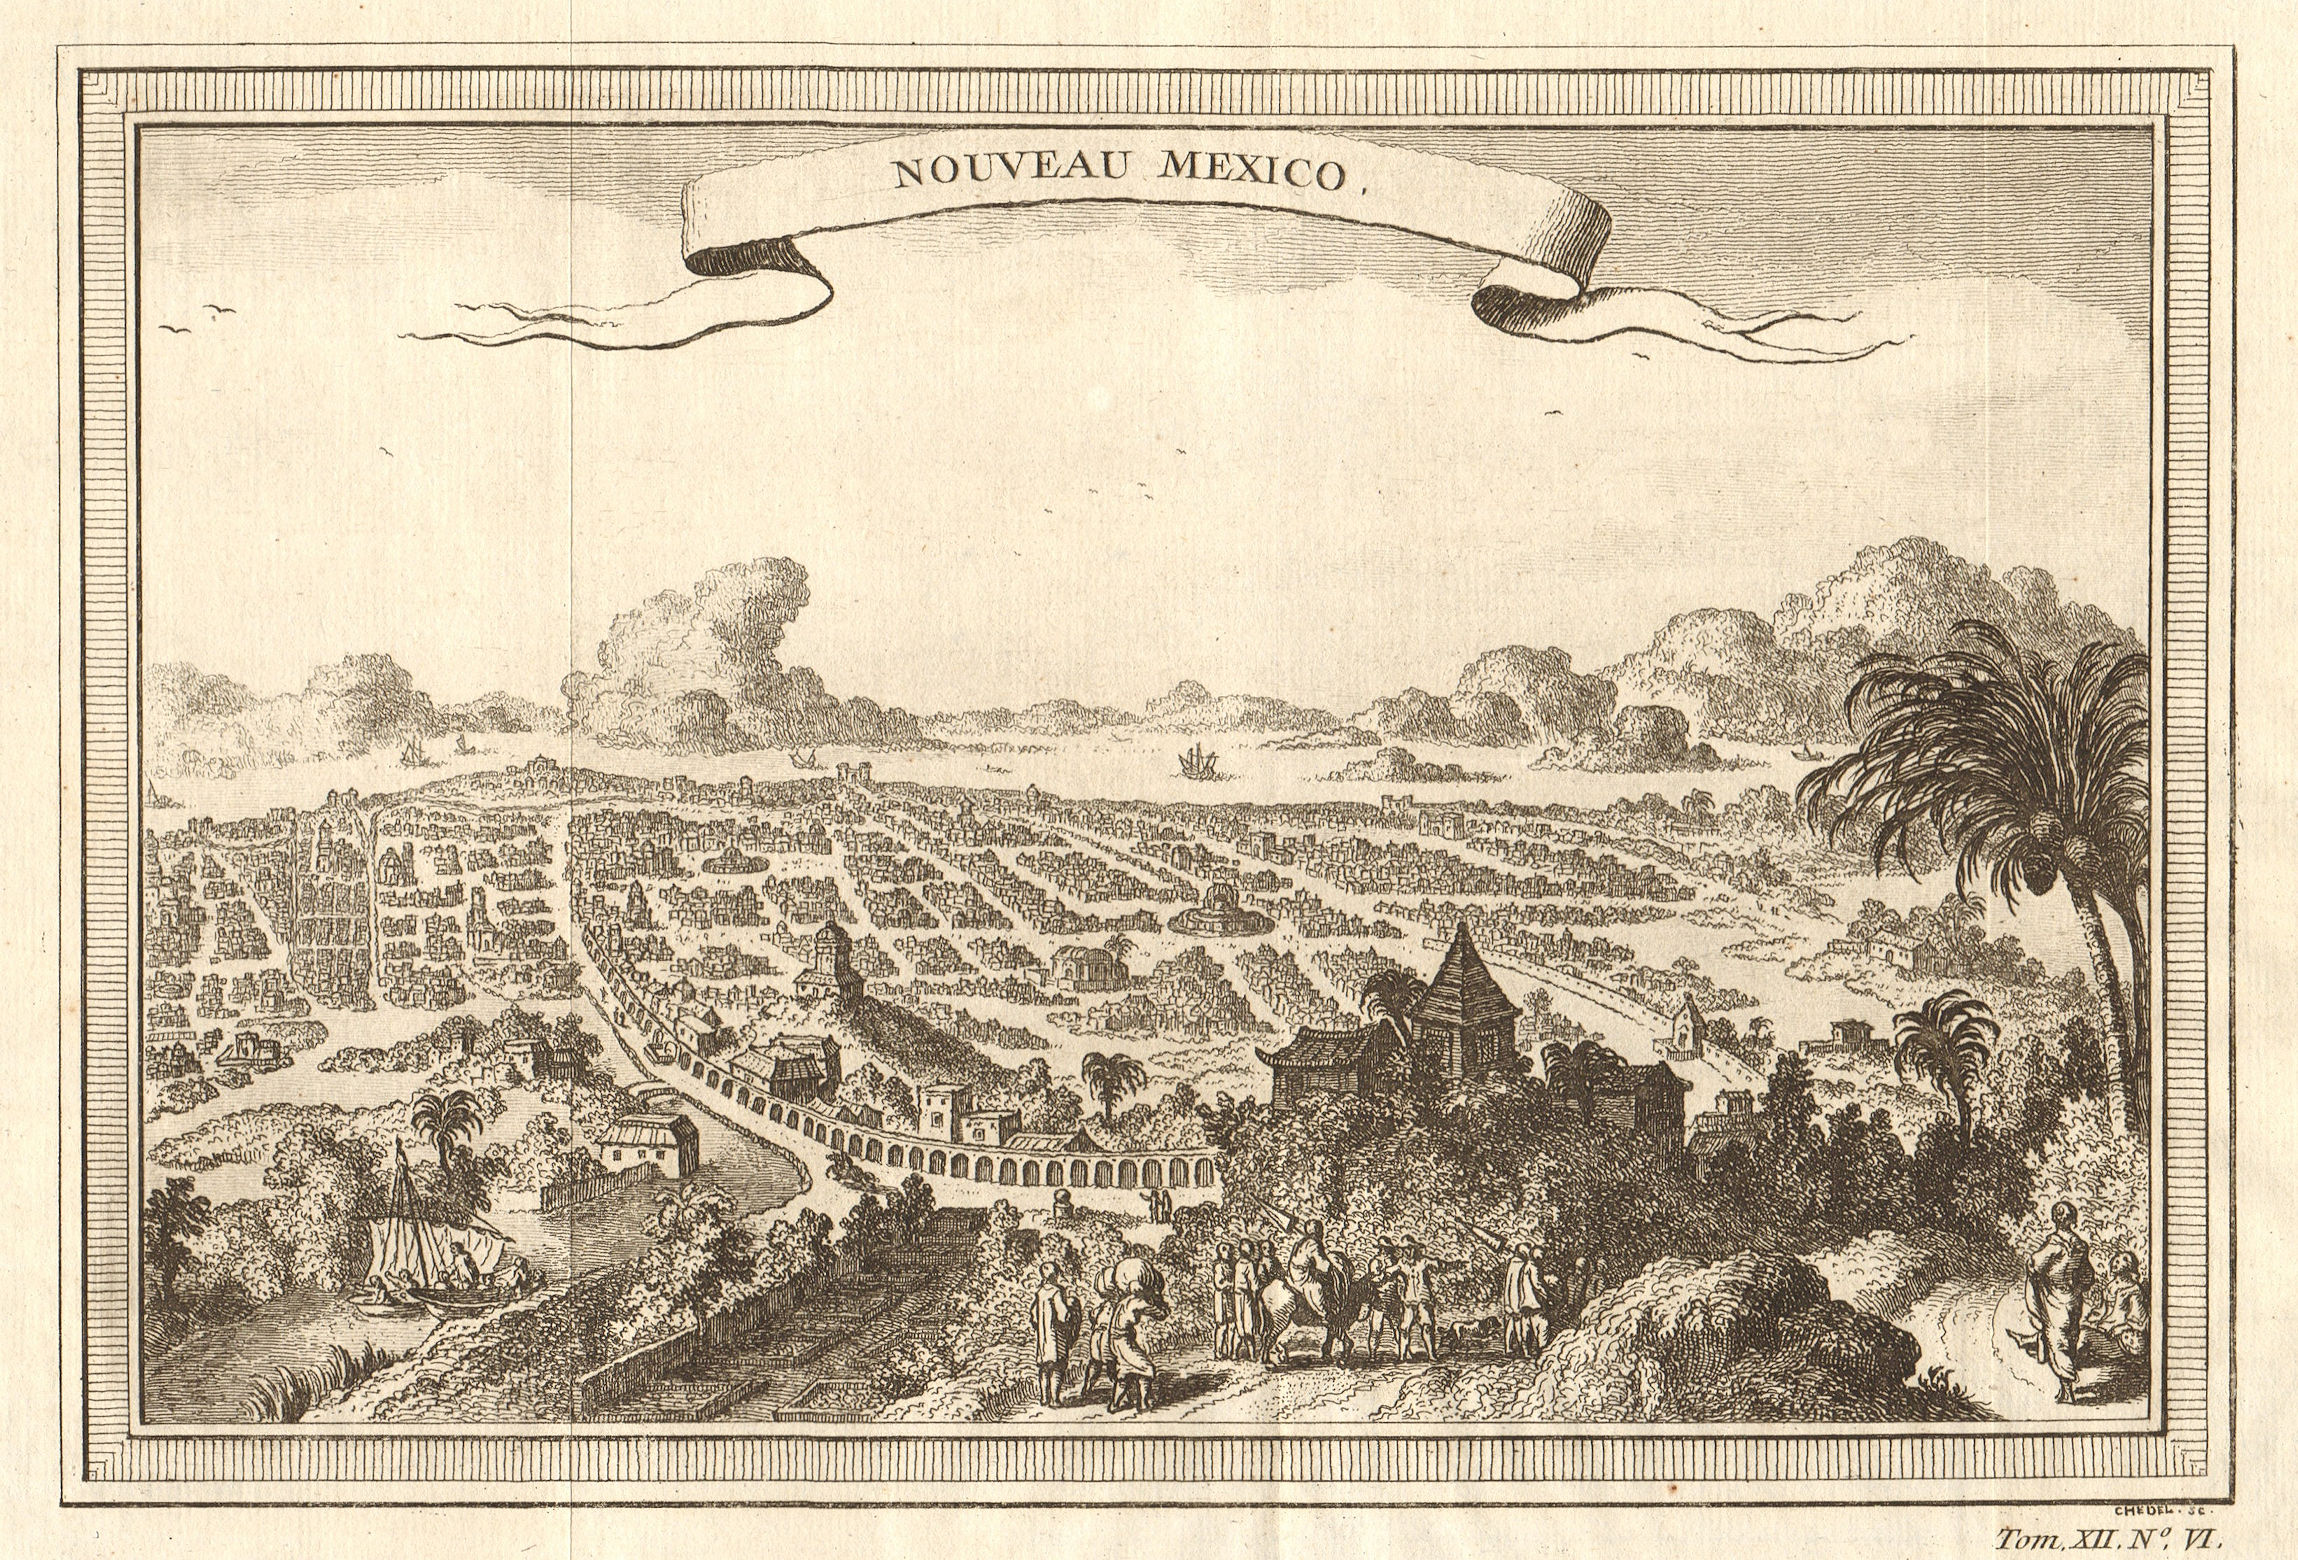 Associate Product 'Nouveau Mexico'. Mexico City as it was in the 18th century 1754 old print